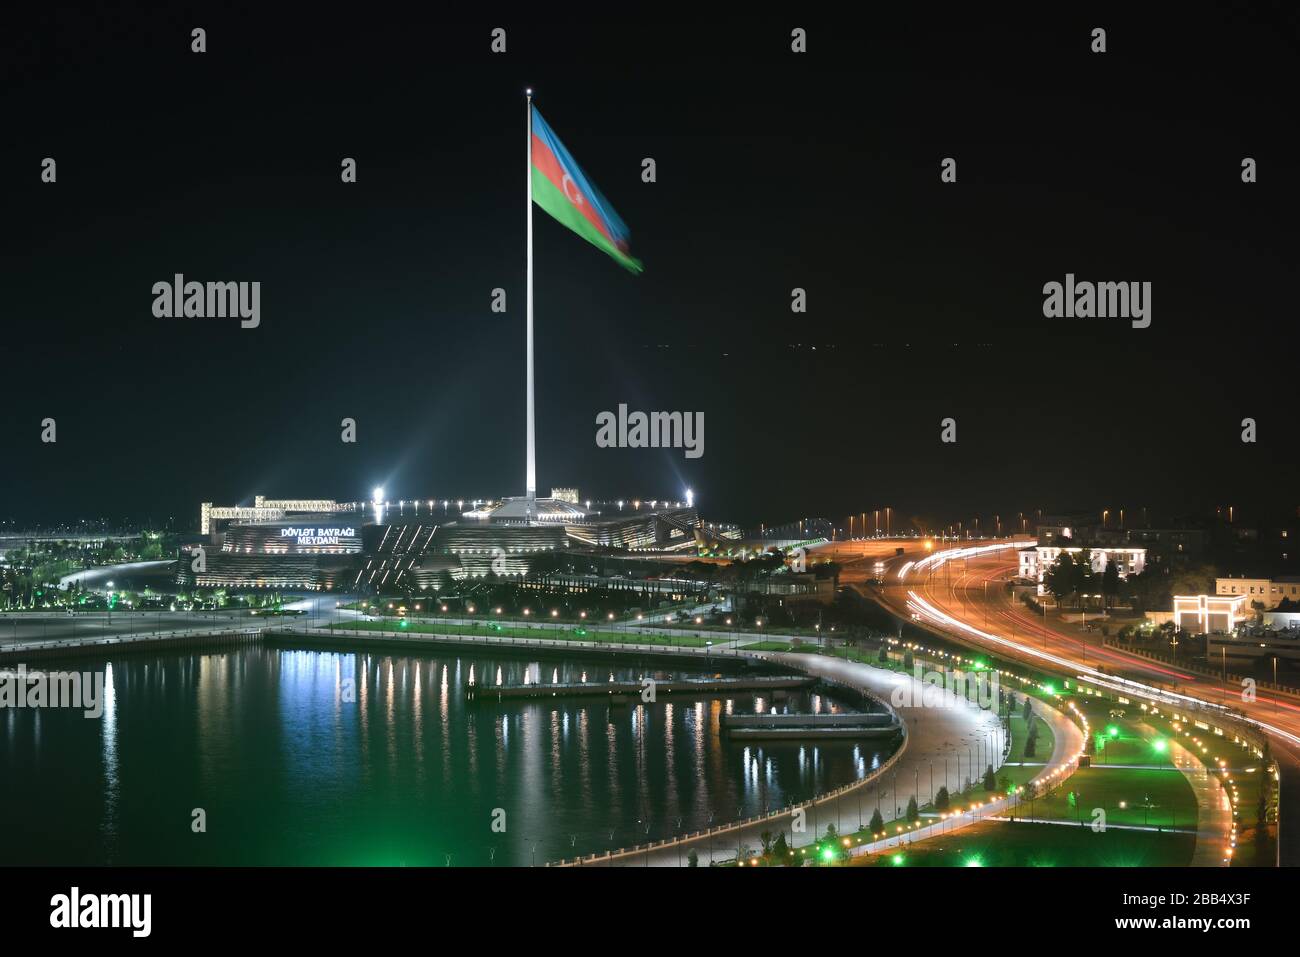 Night time view of the National Flag Square Baku, Azerbaijan built in the margins of the Caspian Sea. Neftchilar Avenue with night illumination. Stock Photo